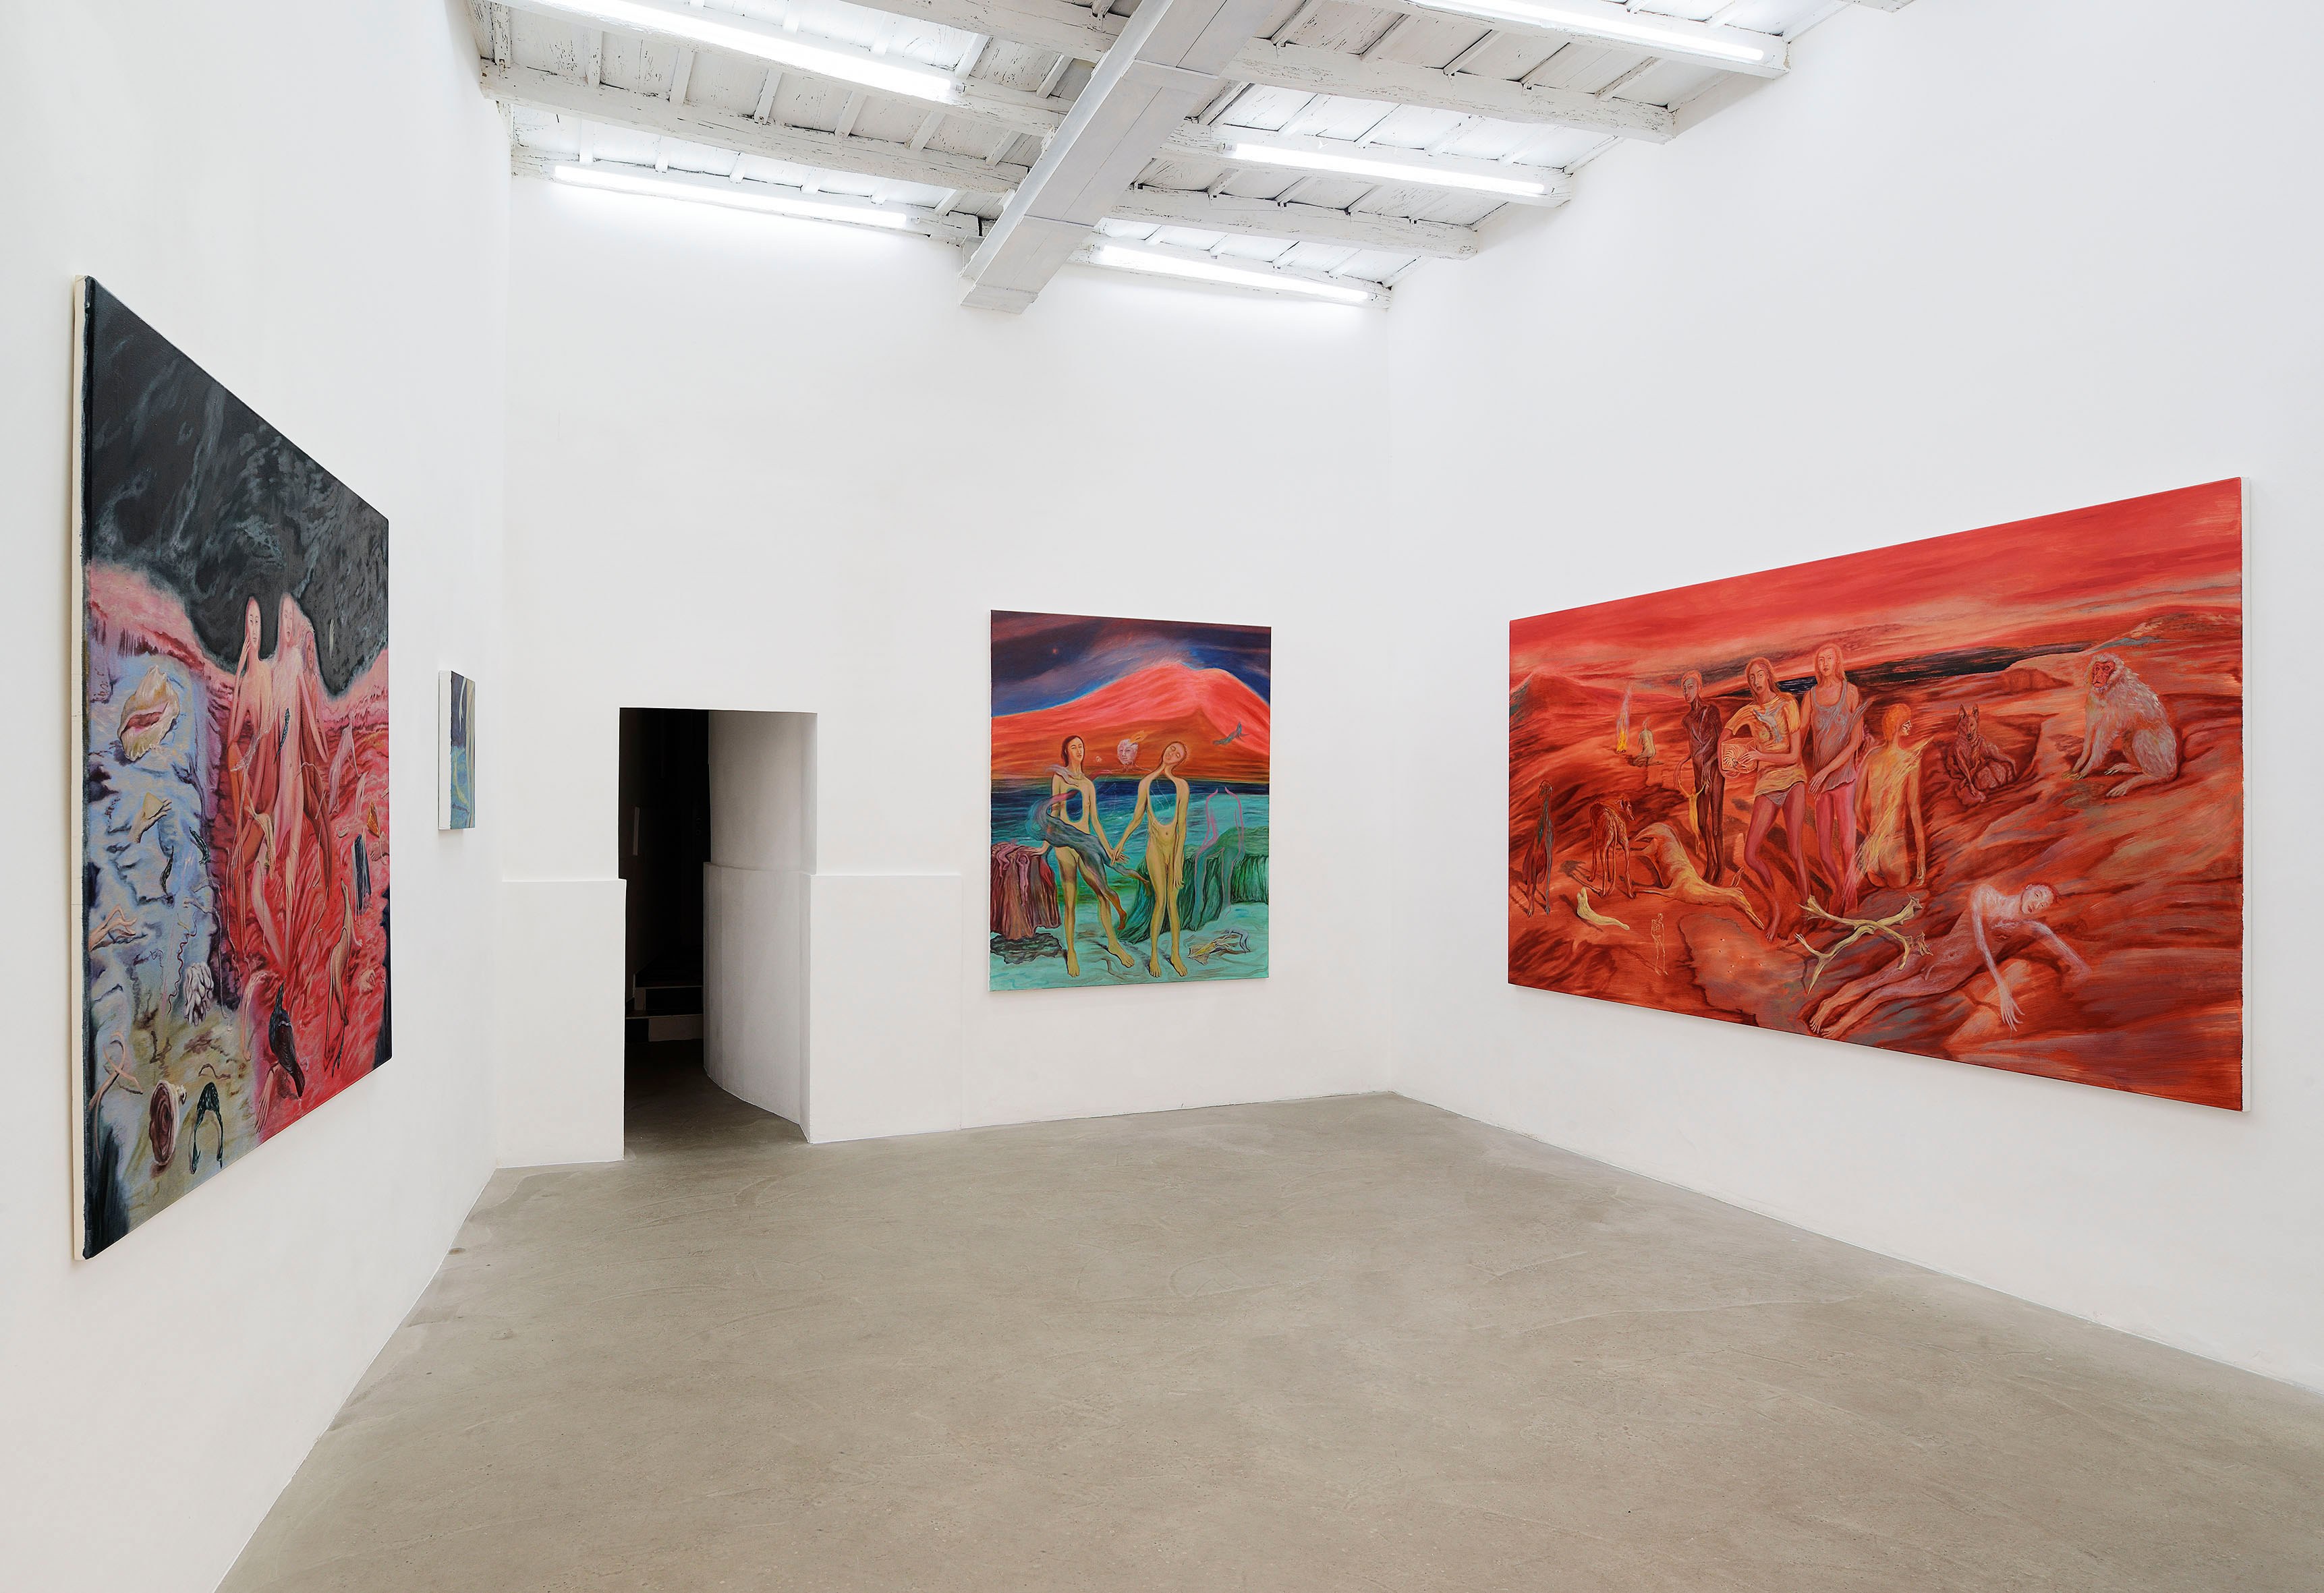 Francesca Banchelli, Fire Song, 2023, installation view at ADA, Rome